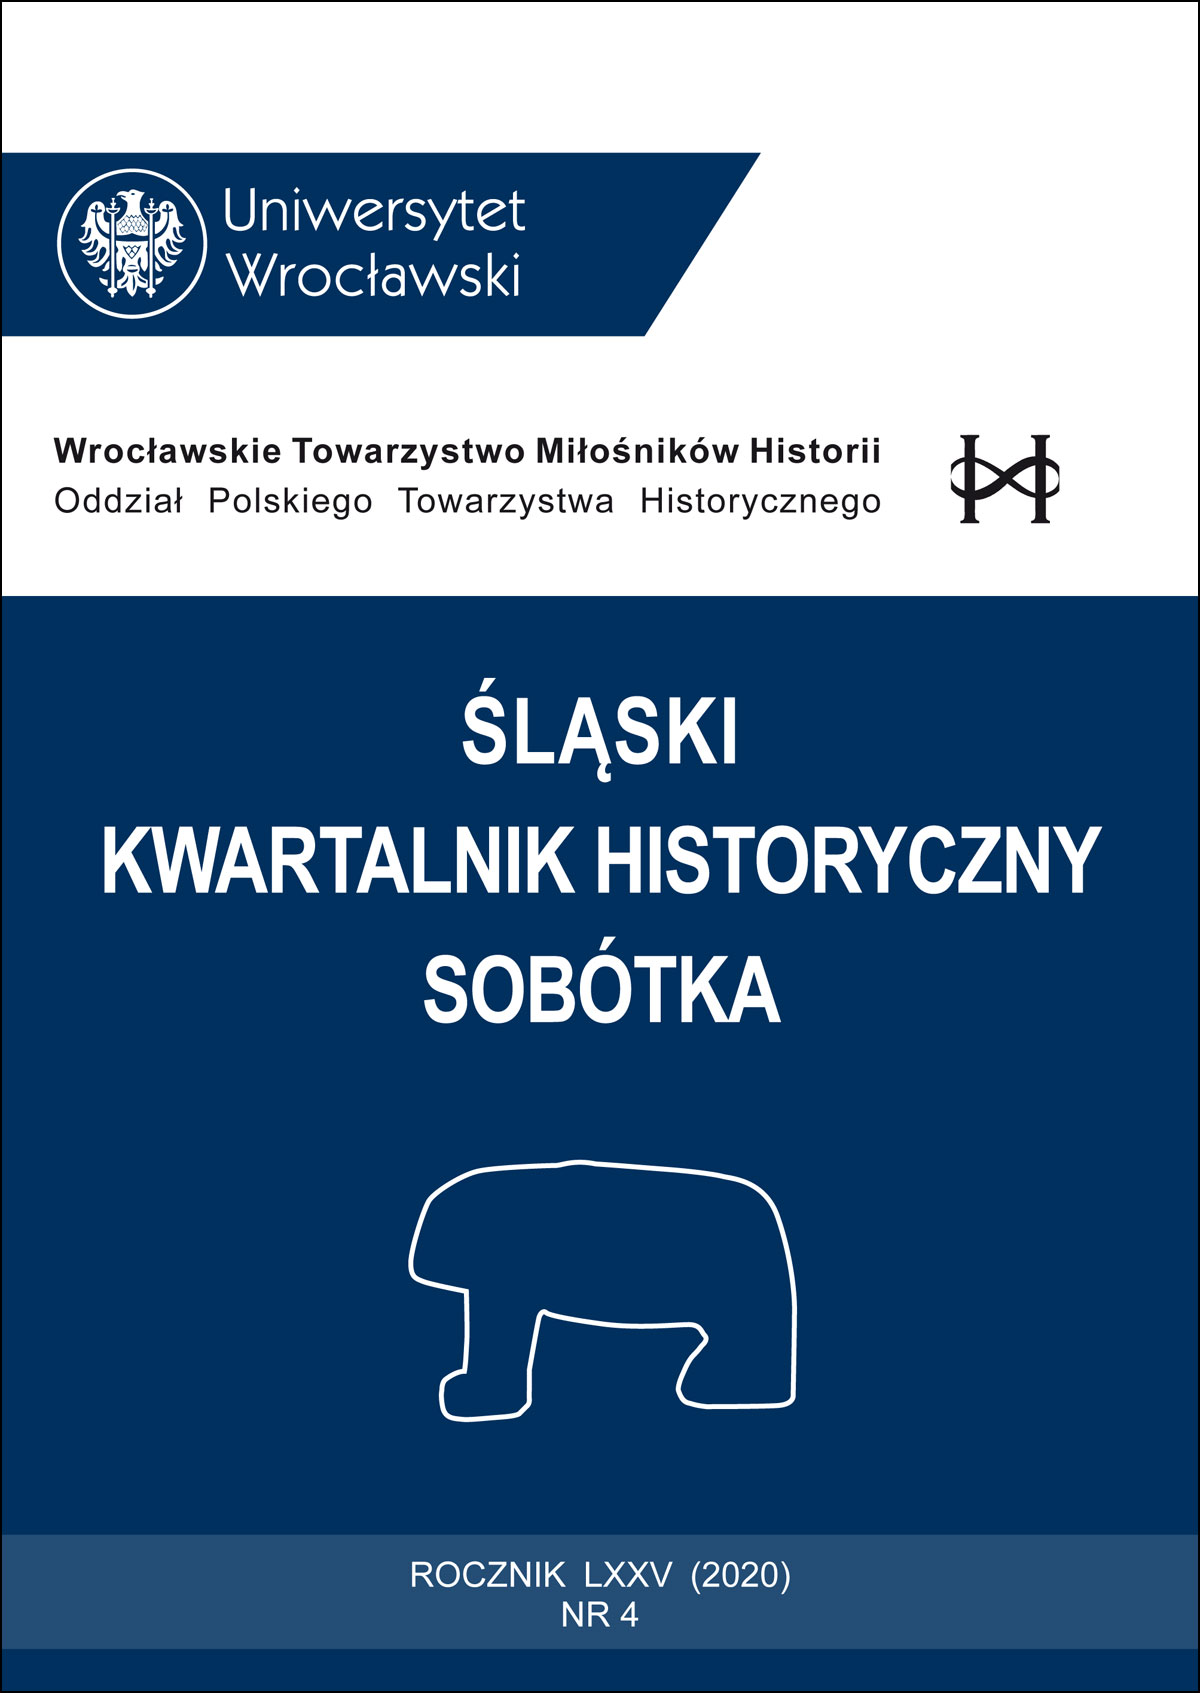 The rotunda of the Racławice Panorama in Wrocław: history, concept, form Cover Image